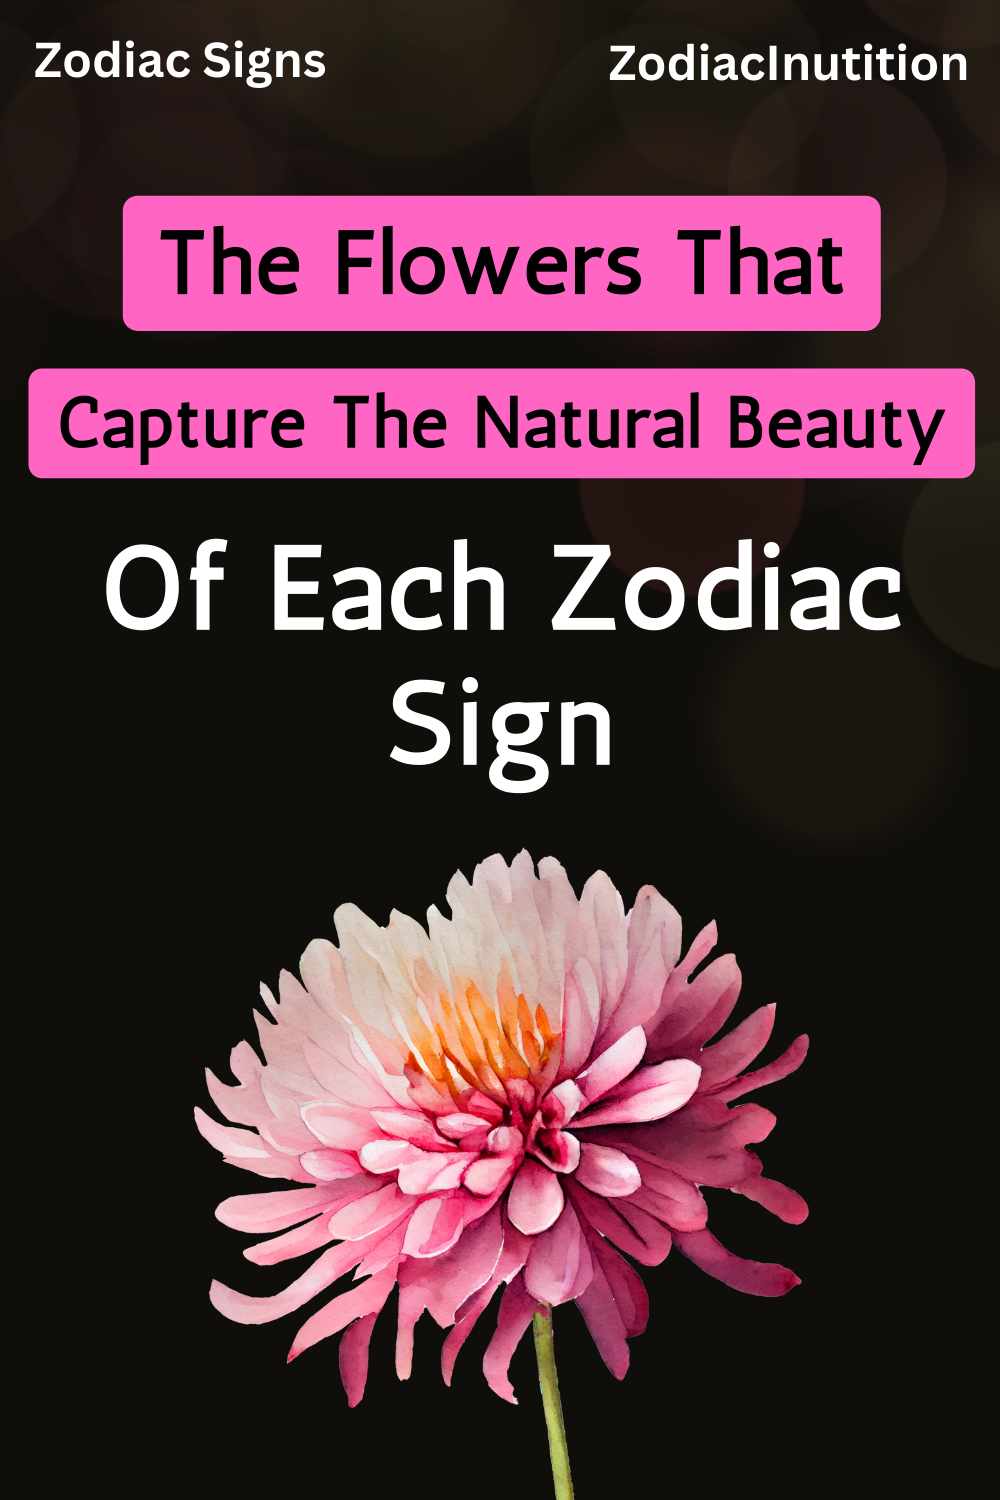 The Flowers That Capture The Natural Beauty Of Each Zodiac Sign